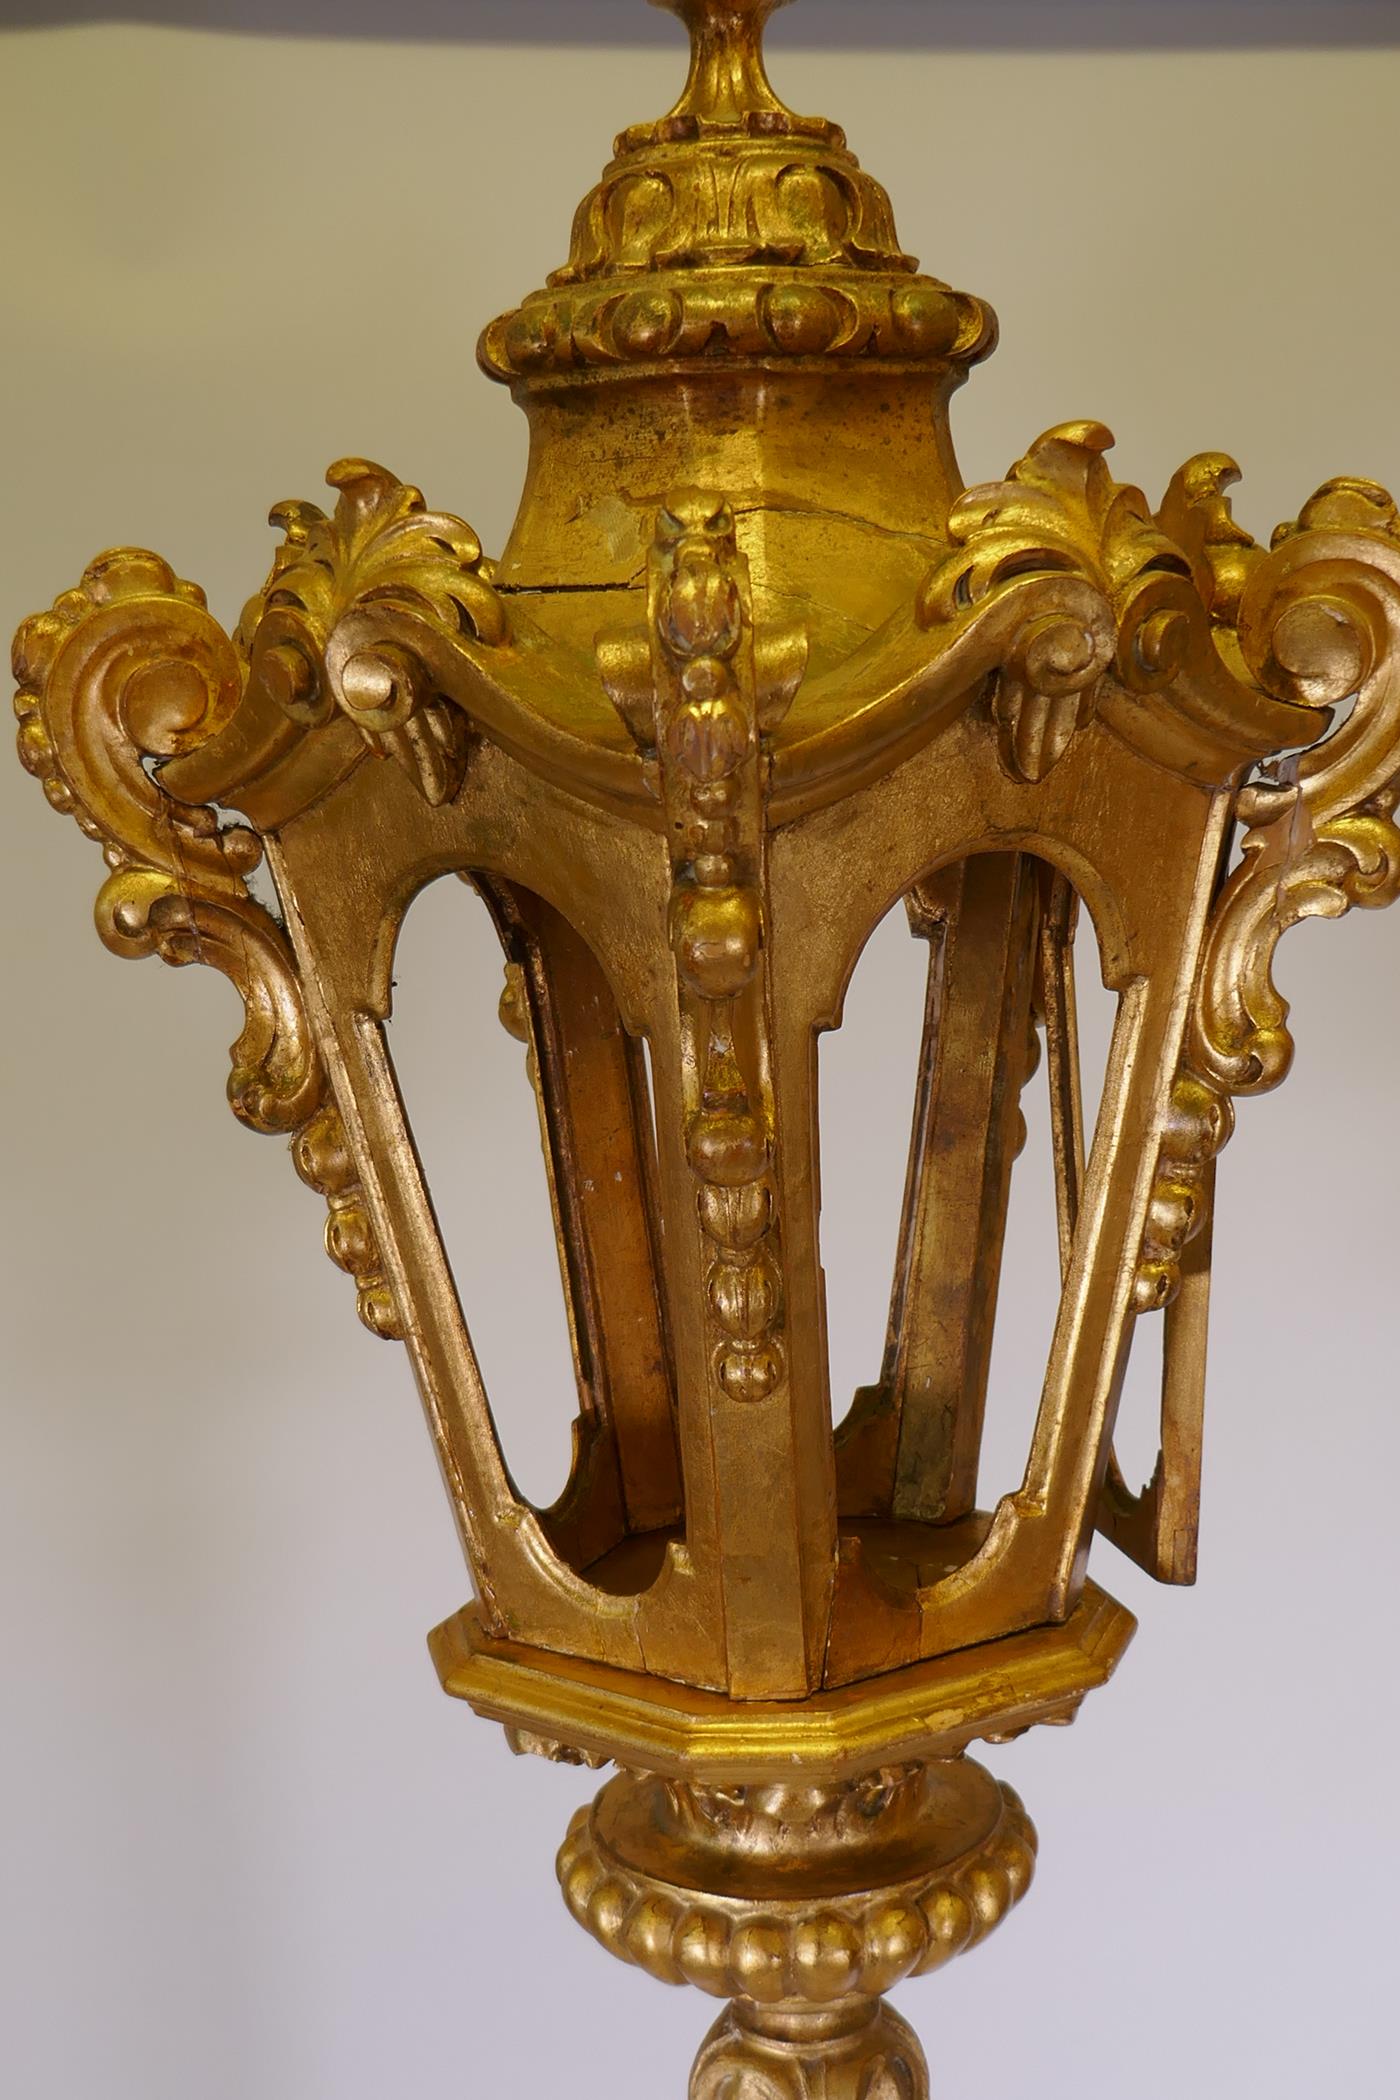 Italian giltwood floor lamp in the form of a lantern, mid C20th, 77" high - Image 4 of 5